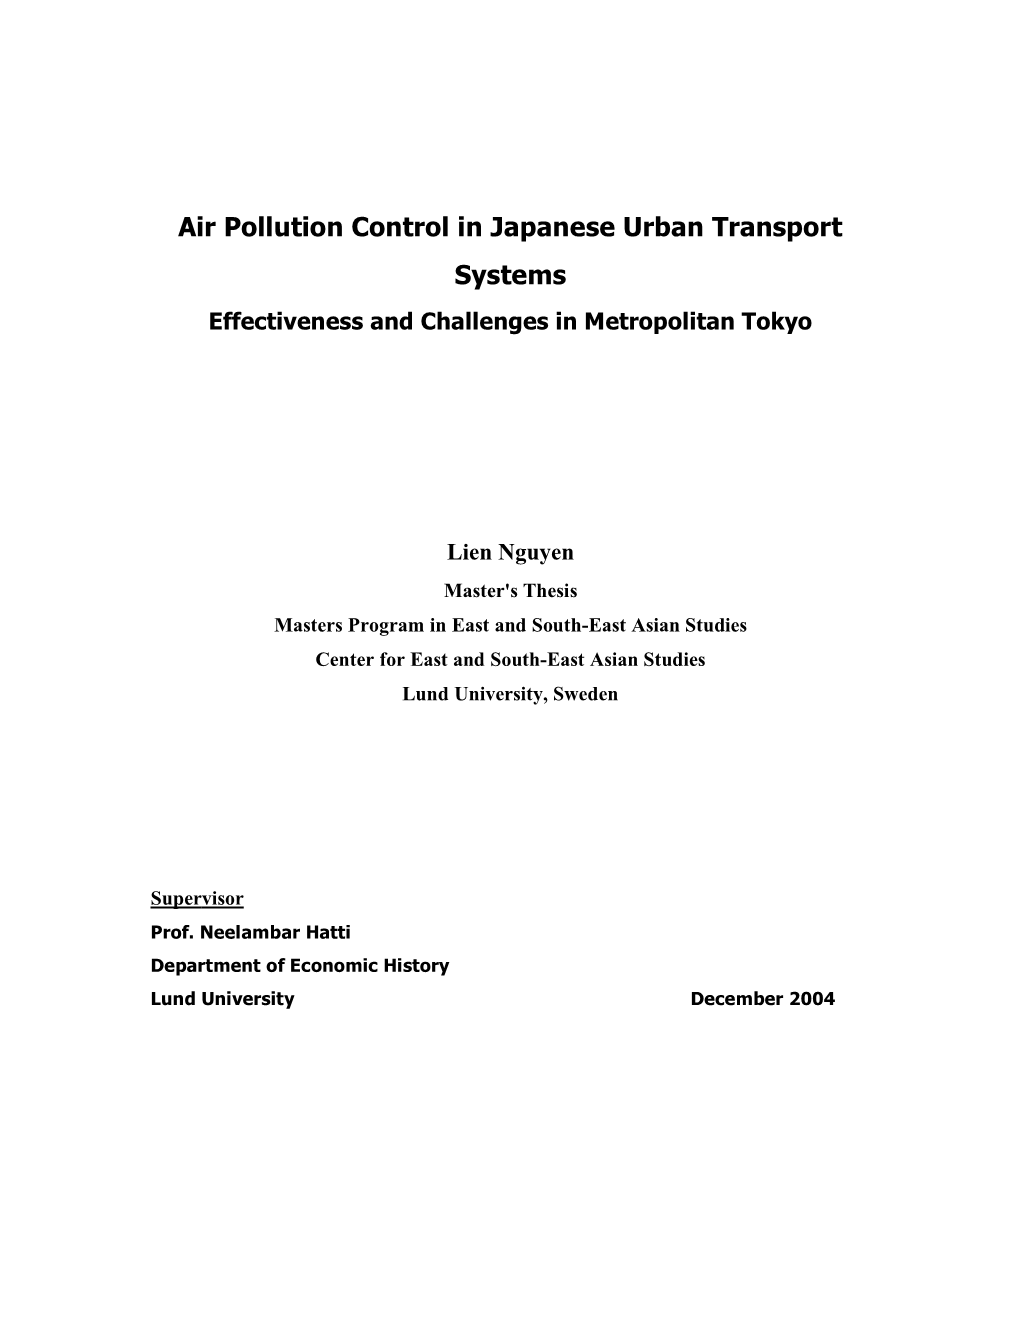 Air Pollution Control in Japanese Urban Transport Systems Effectiveness and Challenges in Metropolitan Tokyo